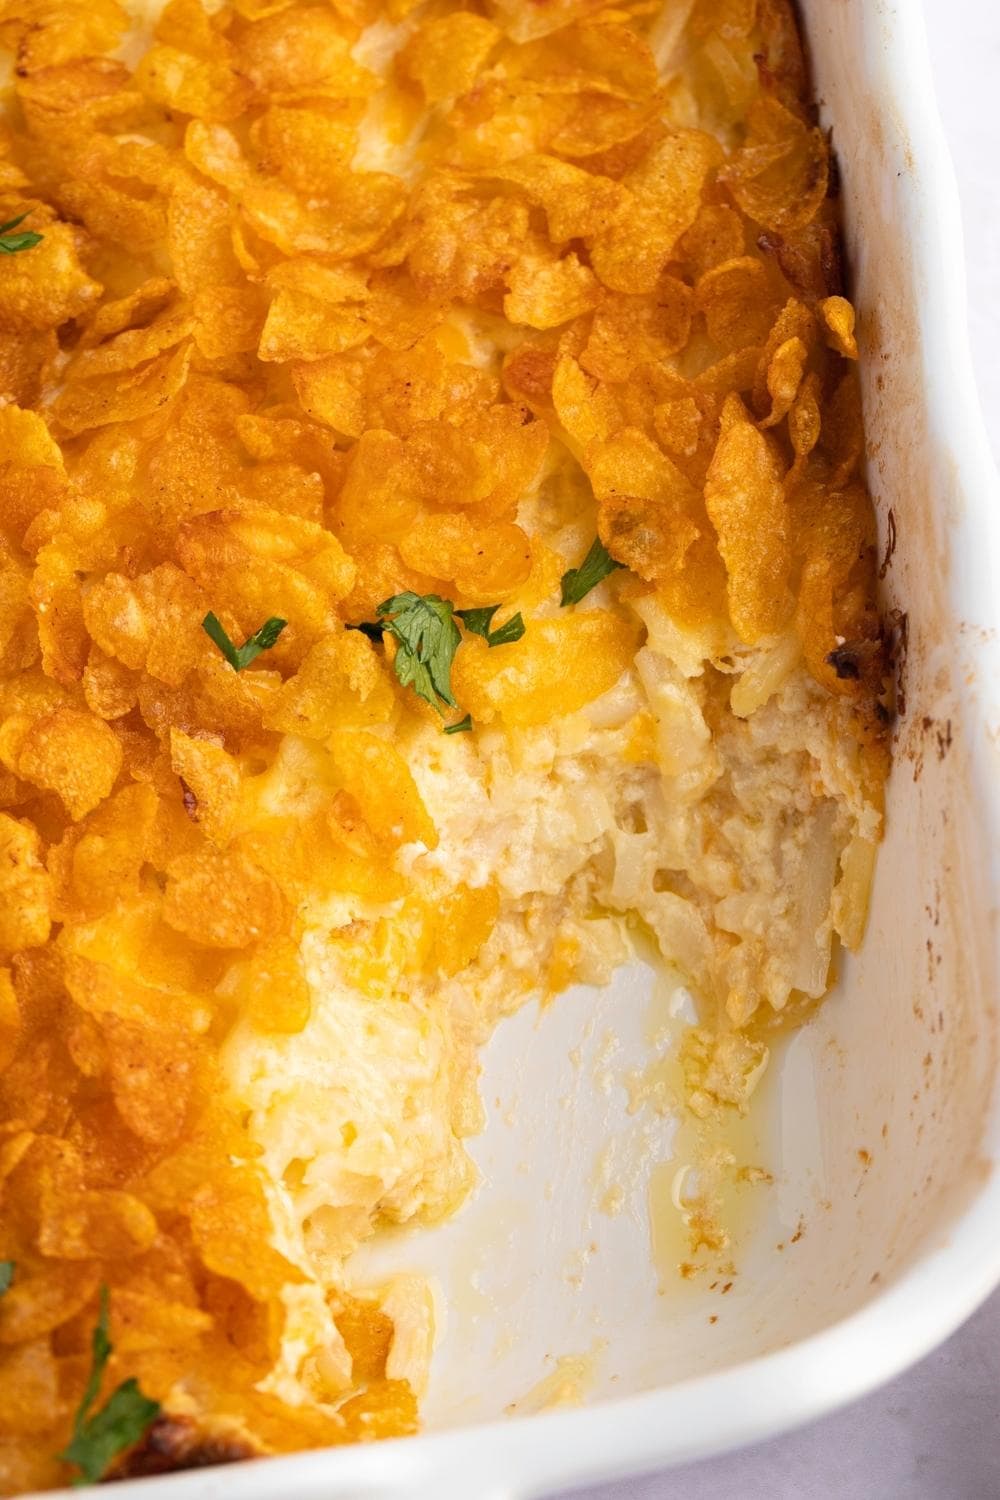 Homemade Funeral Potatoes Casserole with Hash Browns, Cream Sauce, Cheese and Cornflakes